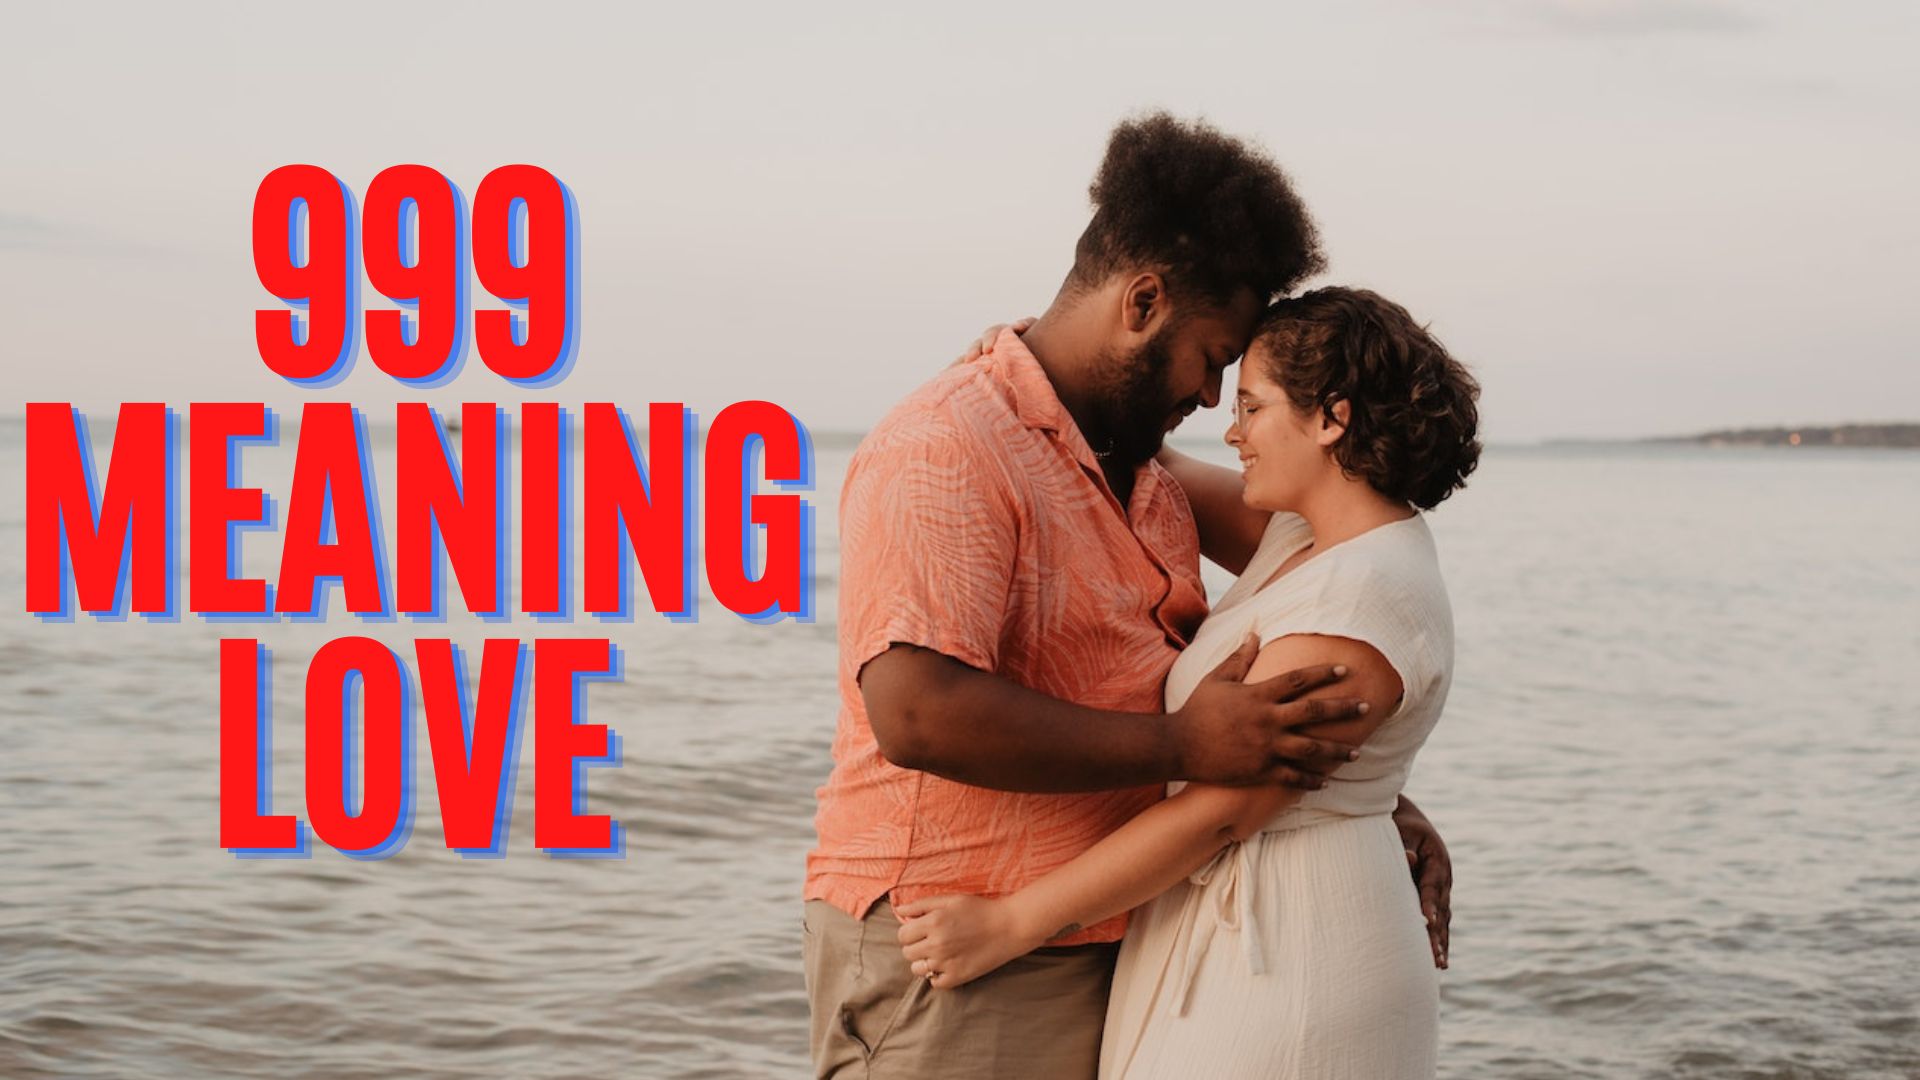 999 Meaning Love - A Sign Of Enduring Love